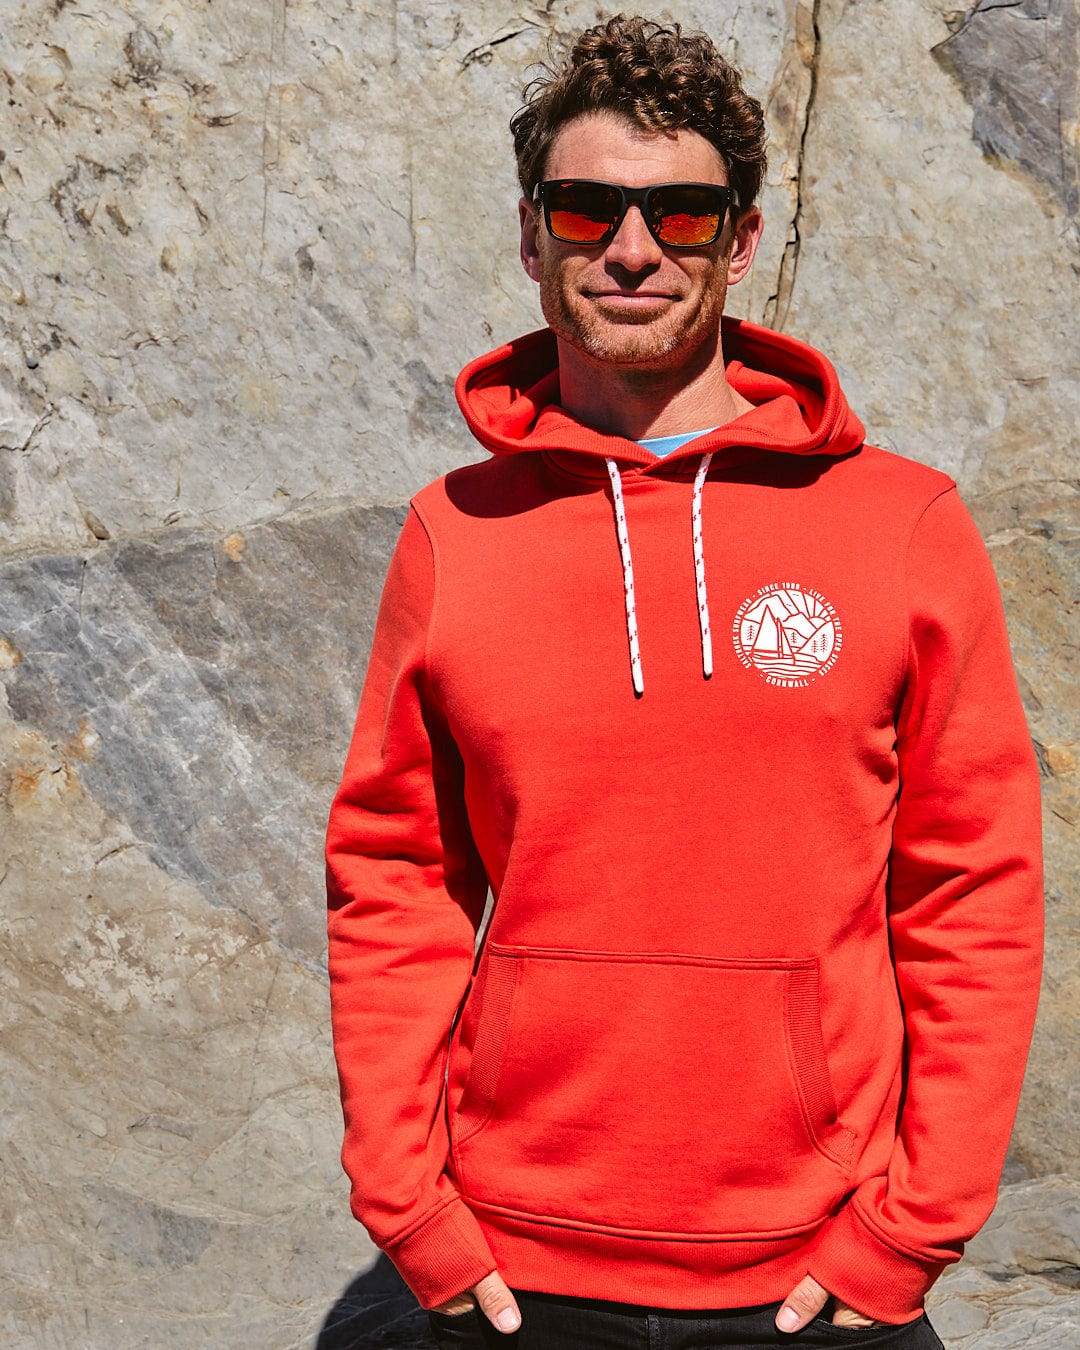 A man in a Saltrock Cornwall Sailaway - Mens Pop Hoodie - Red standing next to a rock.